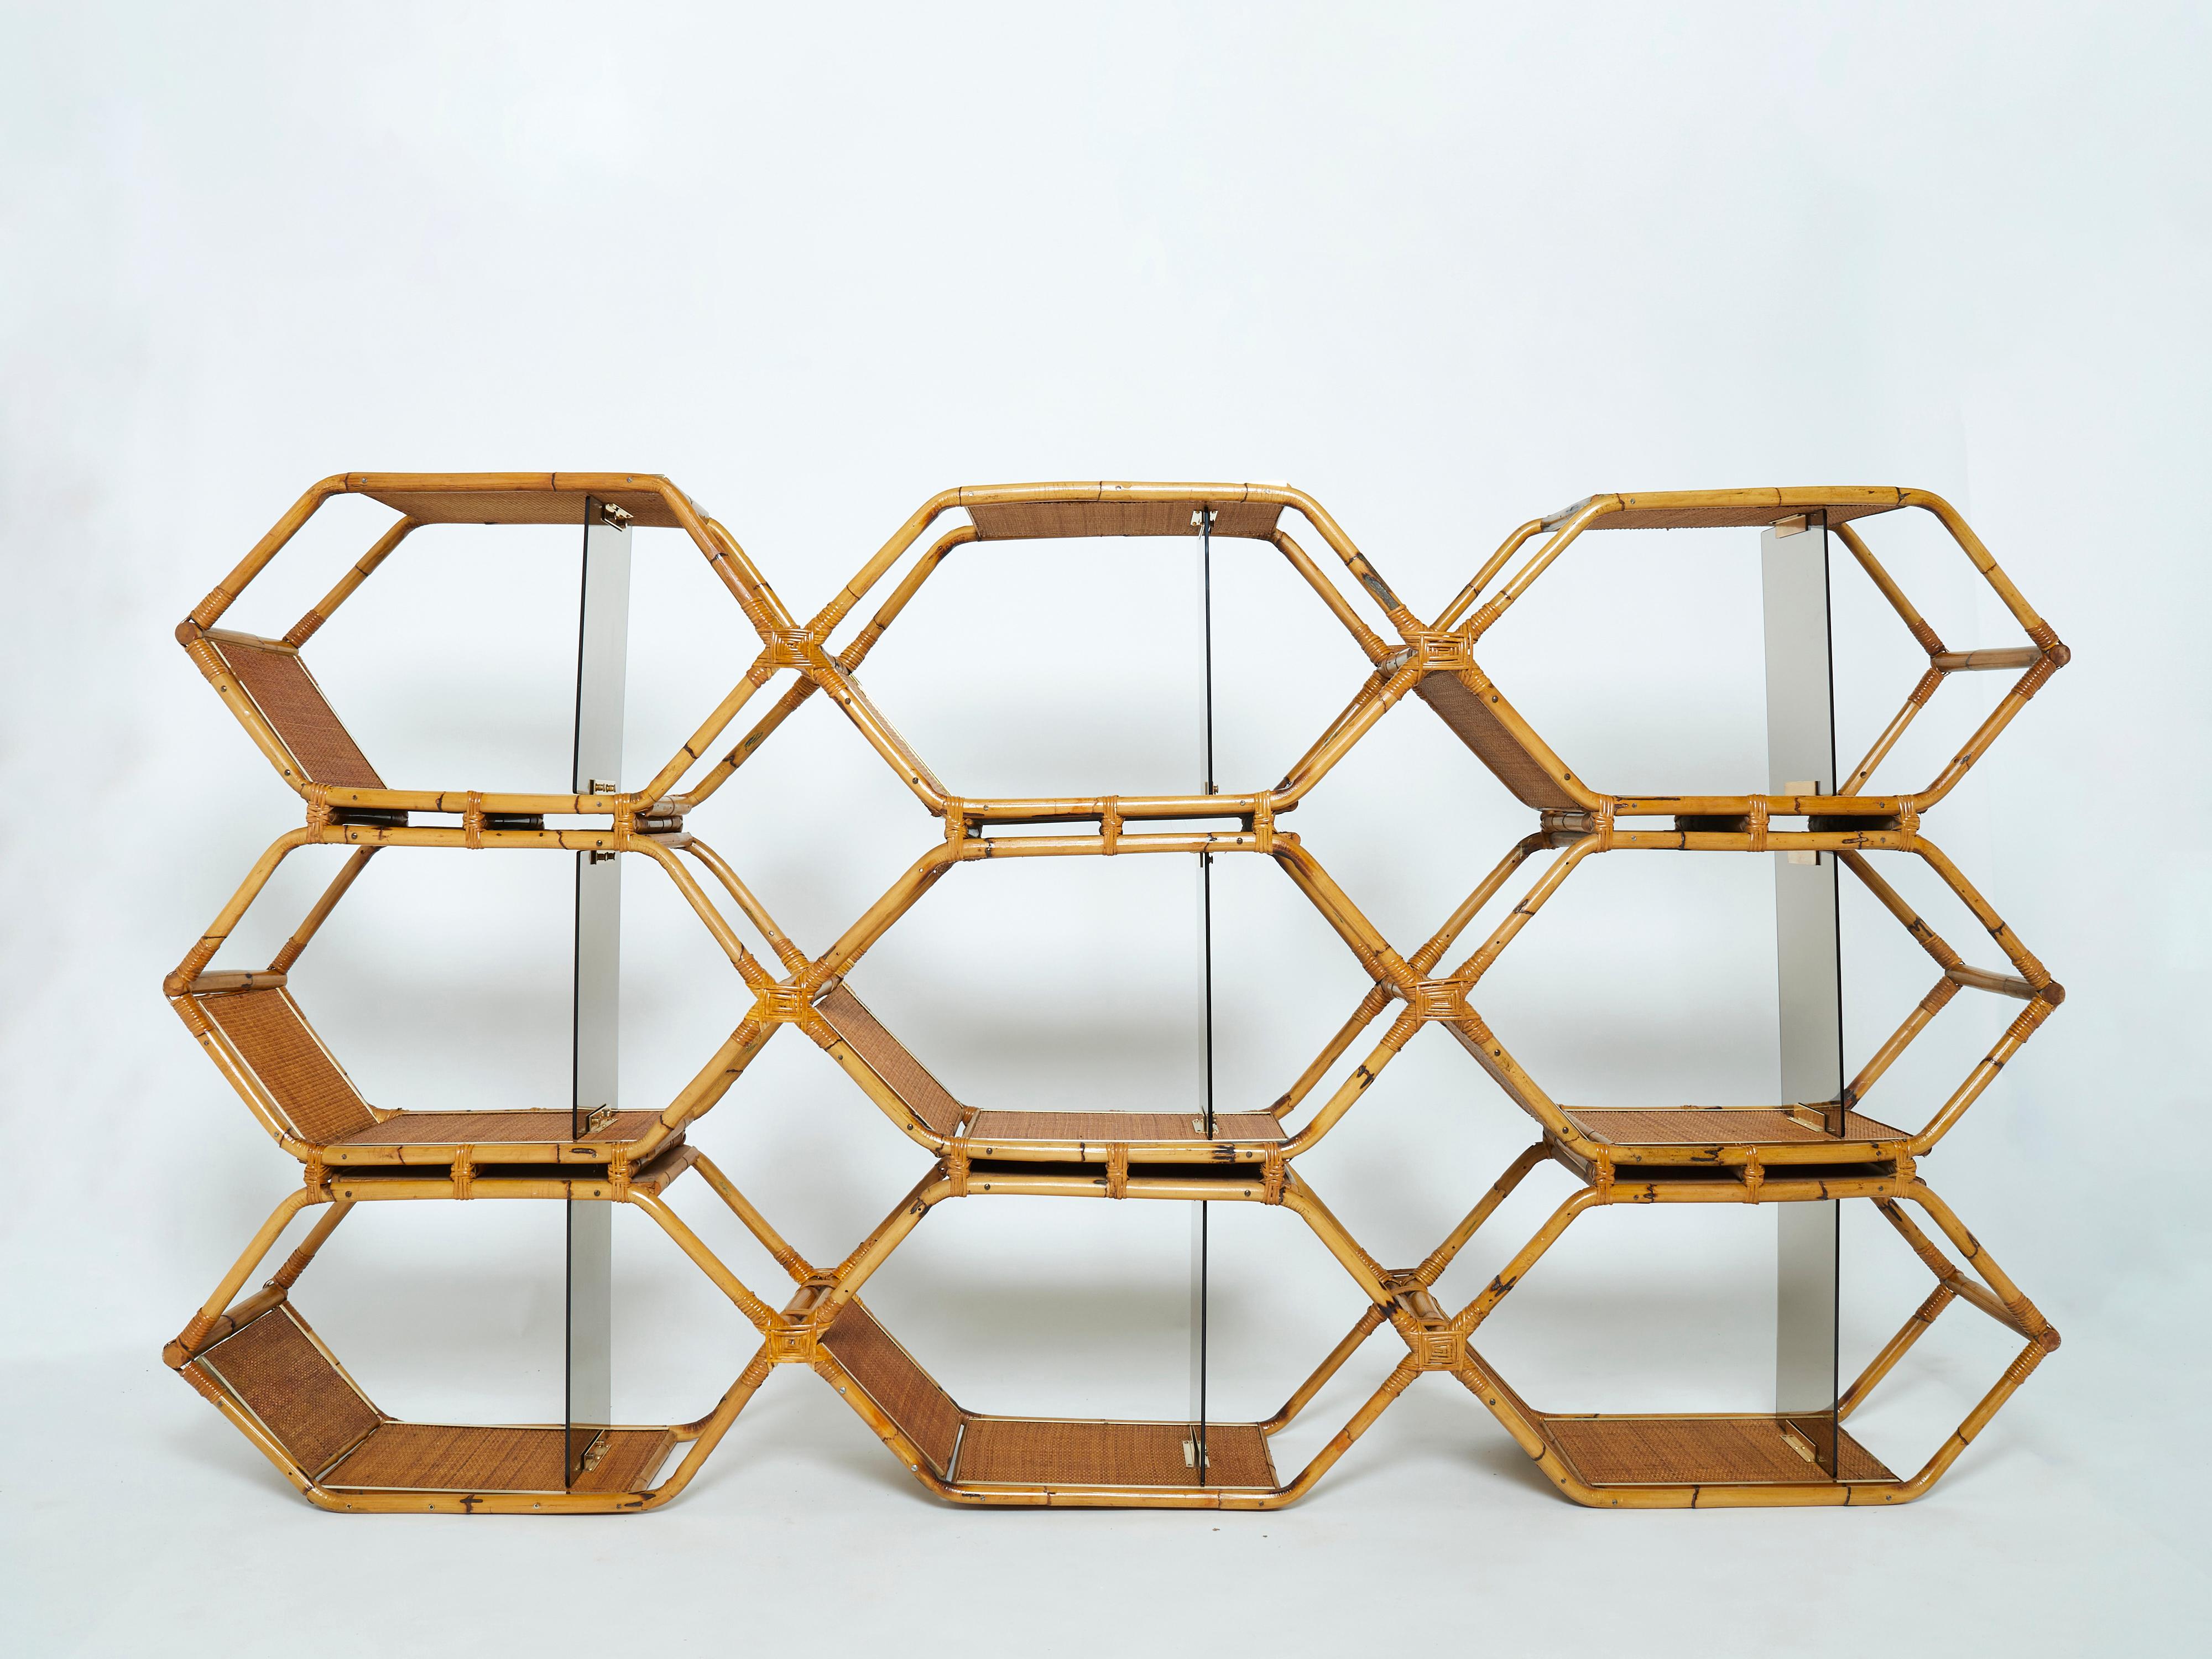 Functional and stylish, this shelving unit or bookcase was made from natural bamboo, with cane joints and luxe displays of brass inserts in Italy in the mid-1970s. It was designed by Giusto Puri Purini and Maurizio Mariani for Vivai Del Sud in 1976.